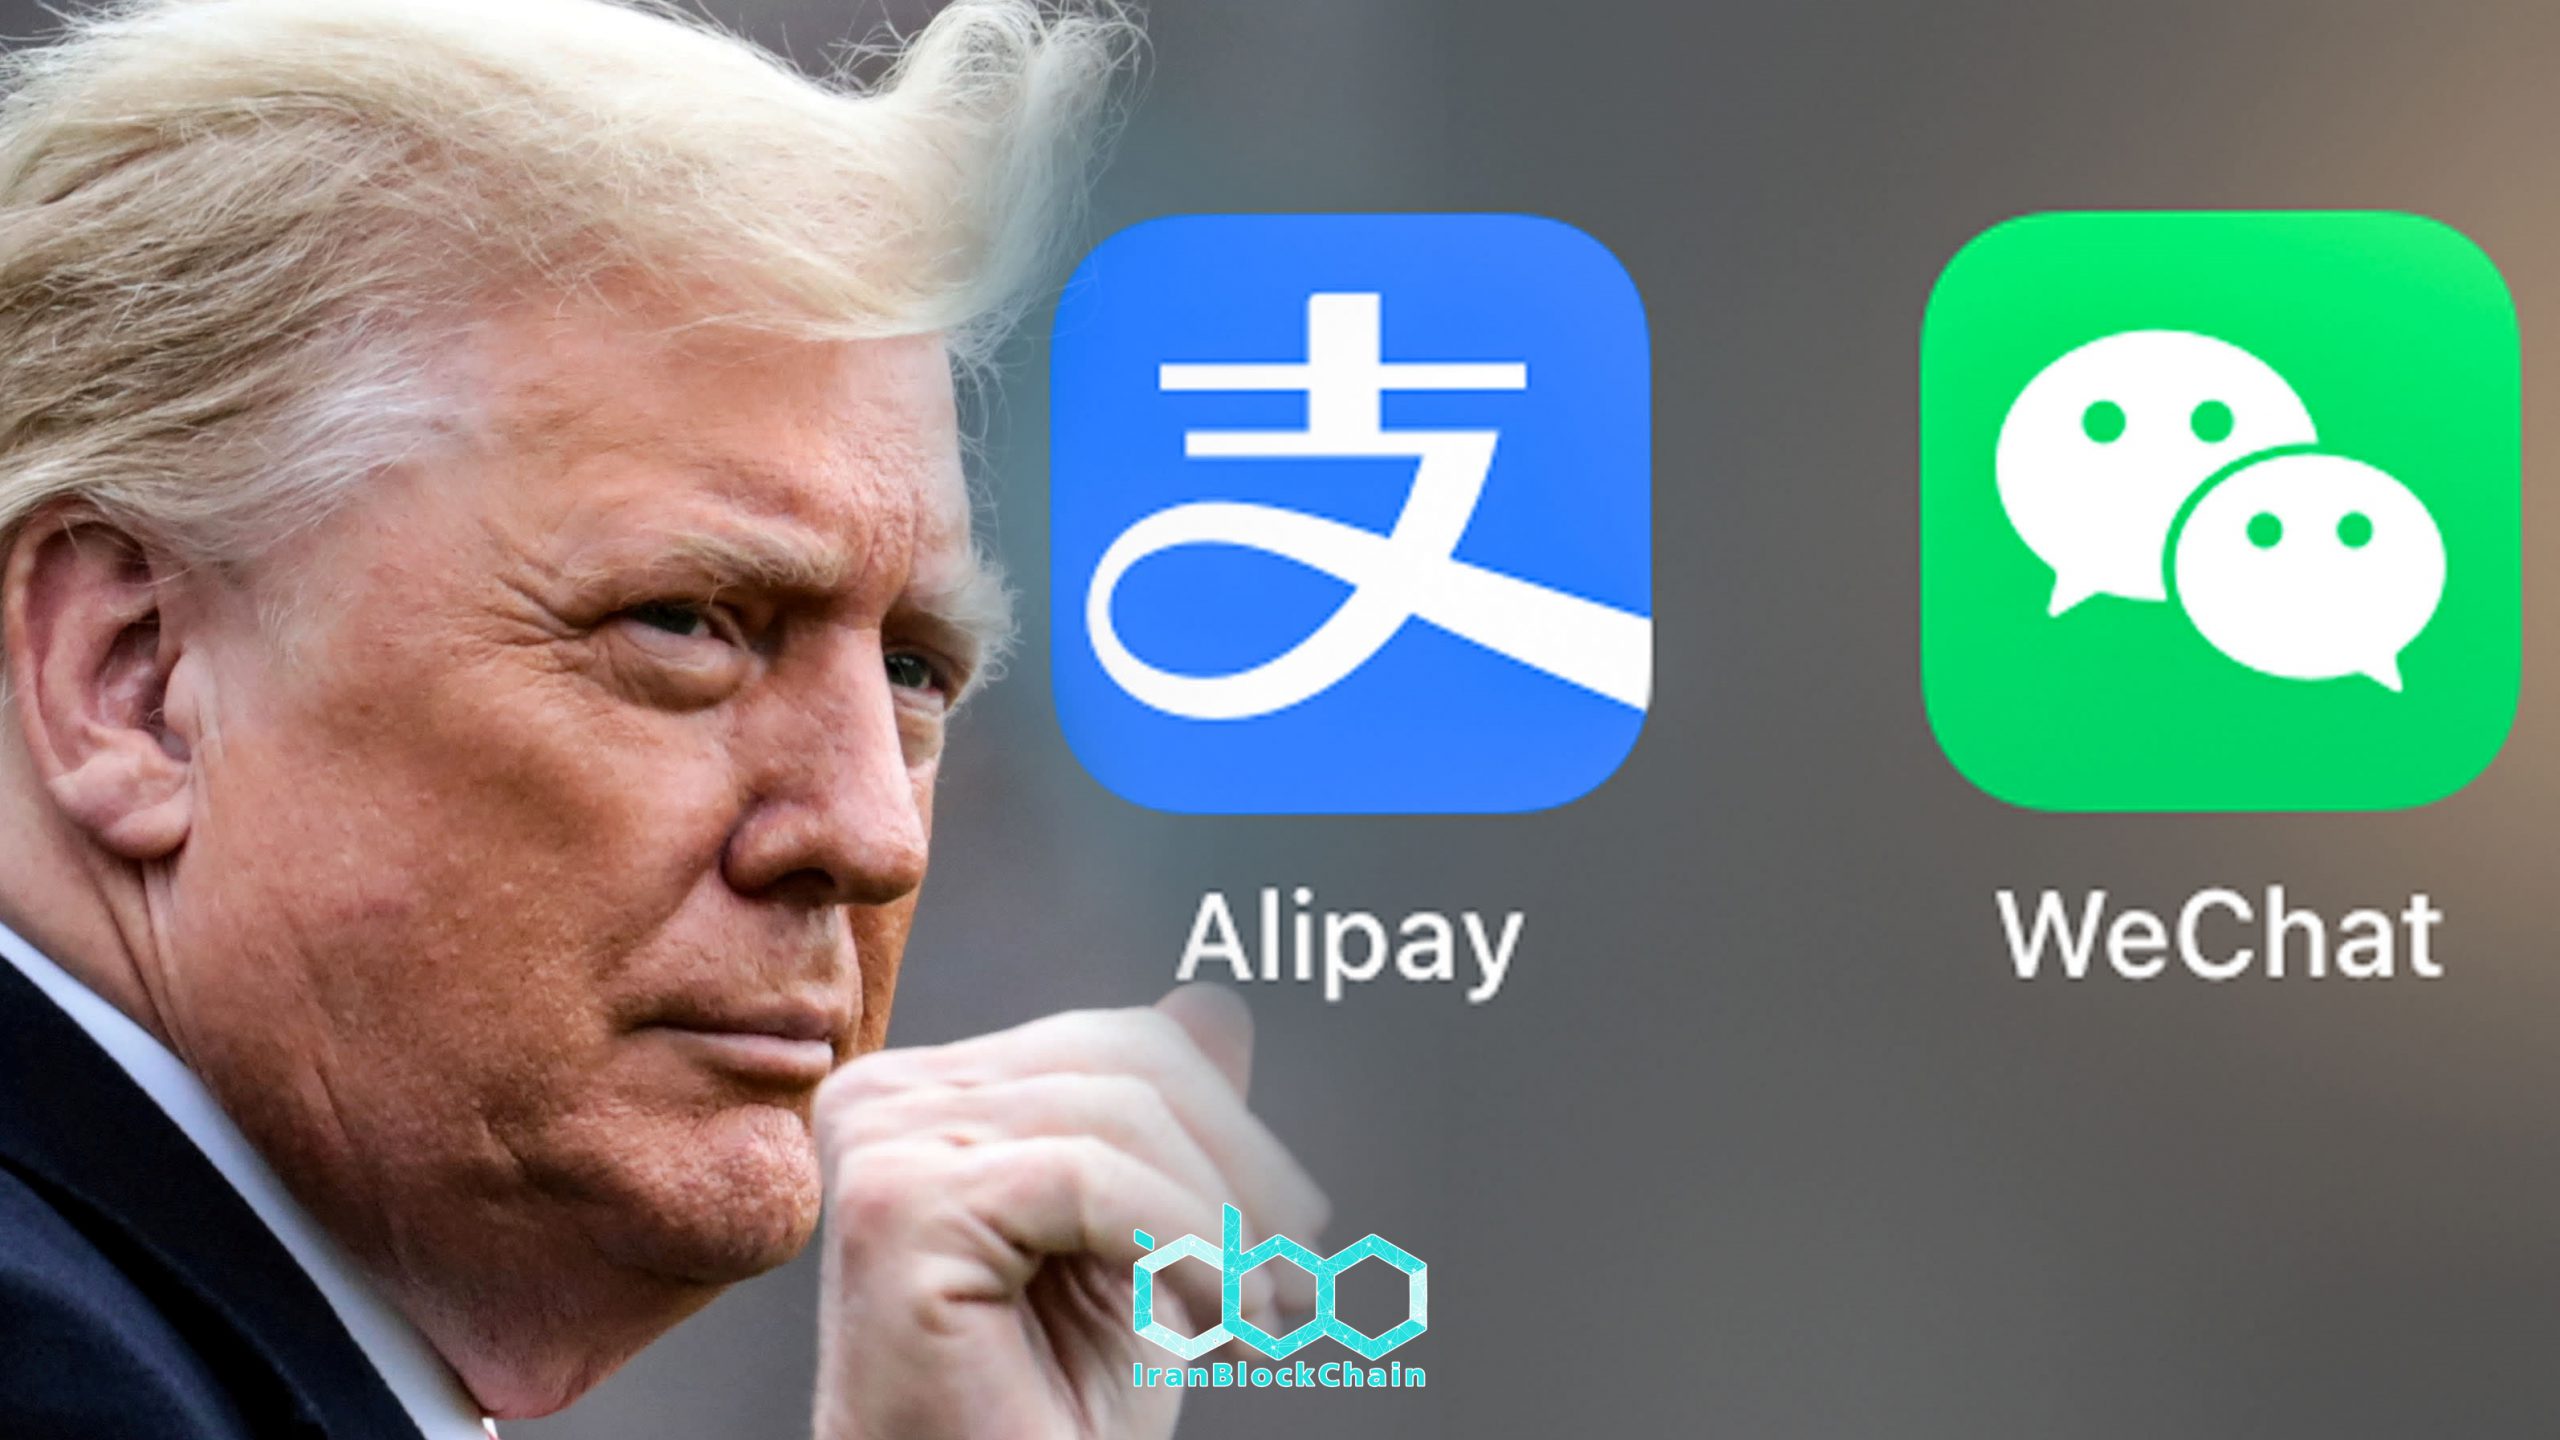 alipay tencent wechat pay qq chinesealperreuters